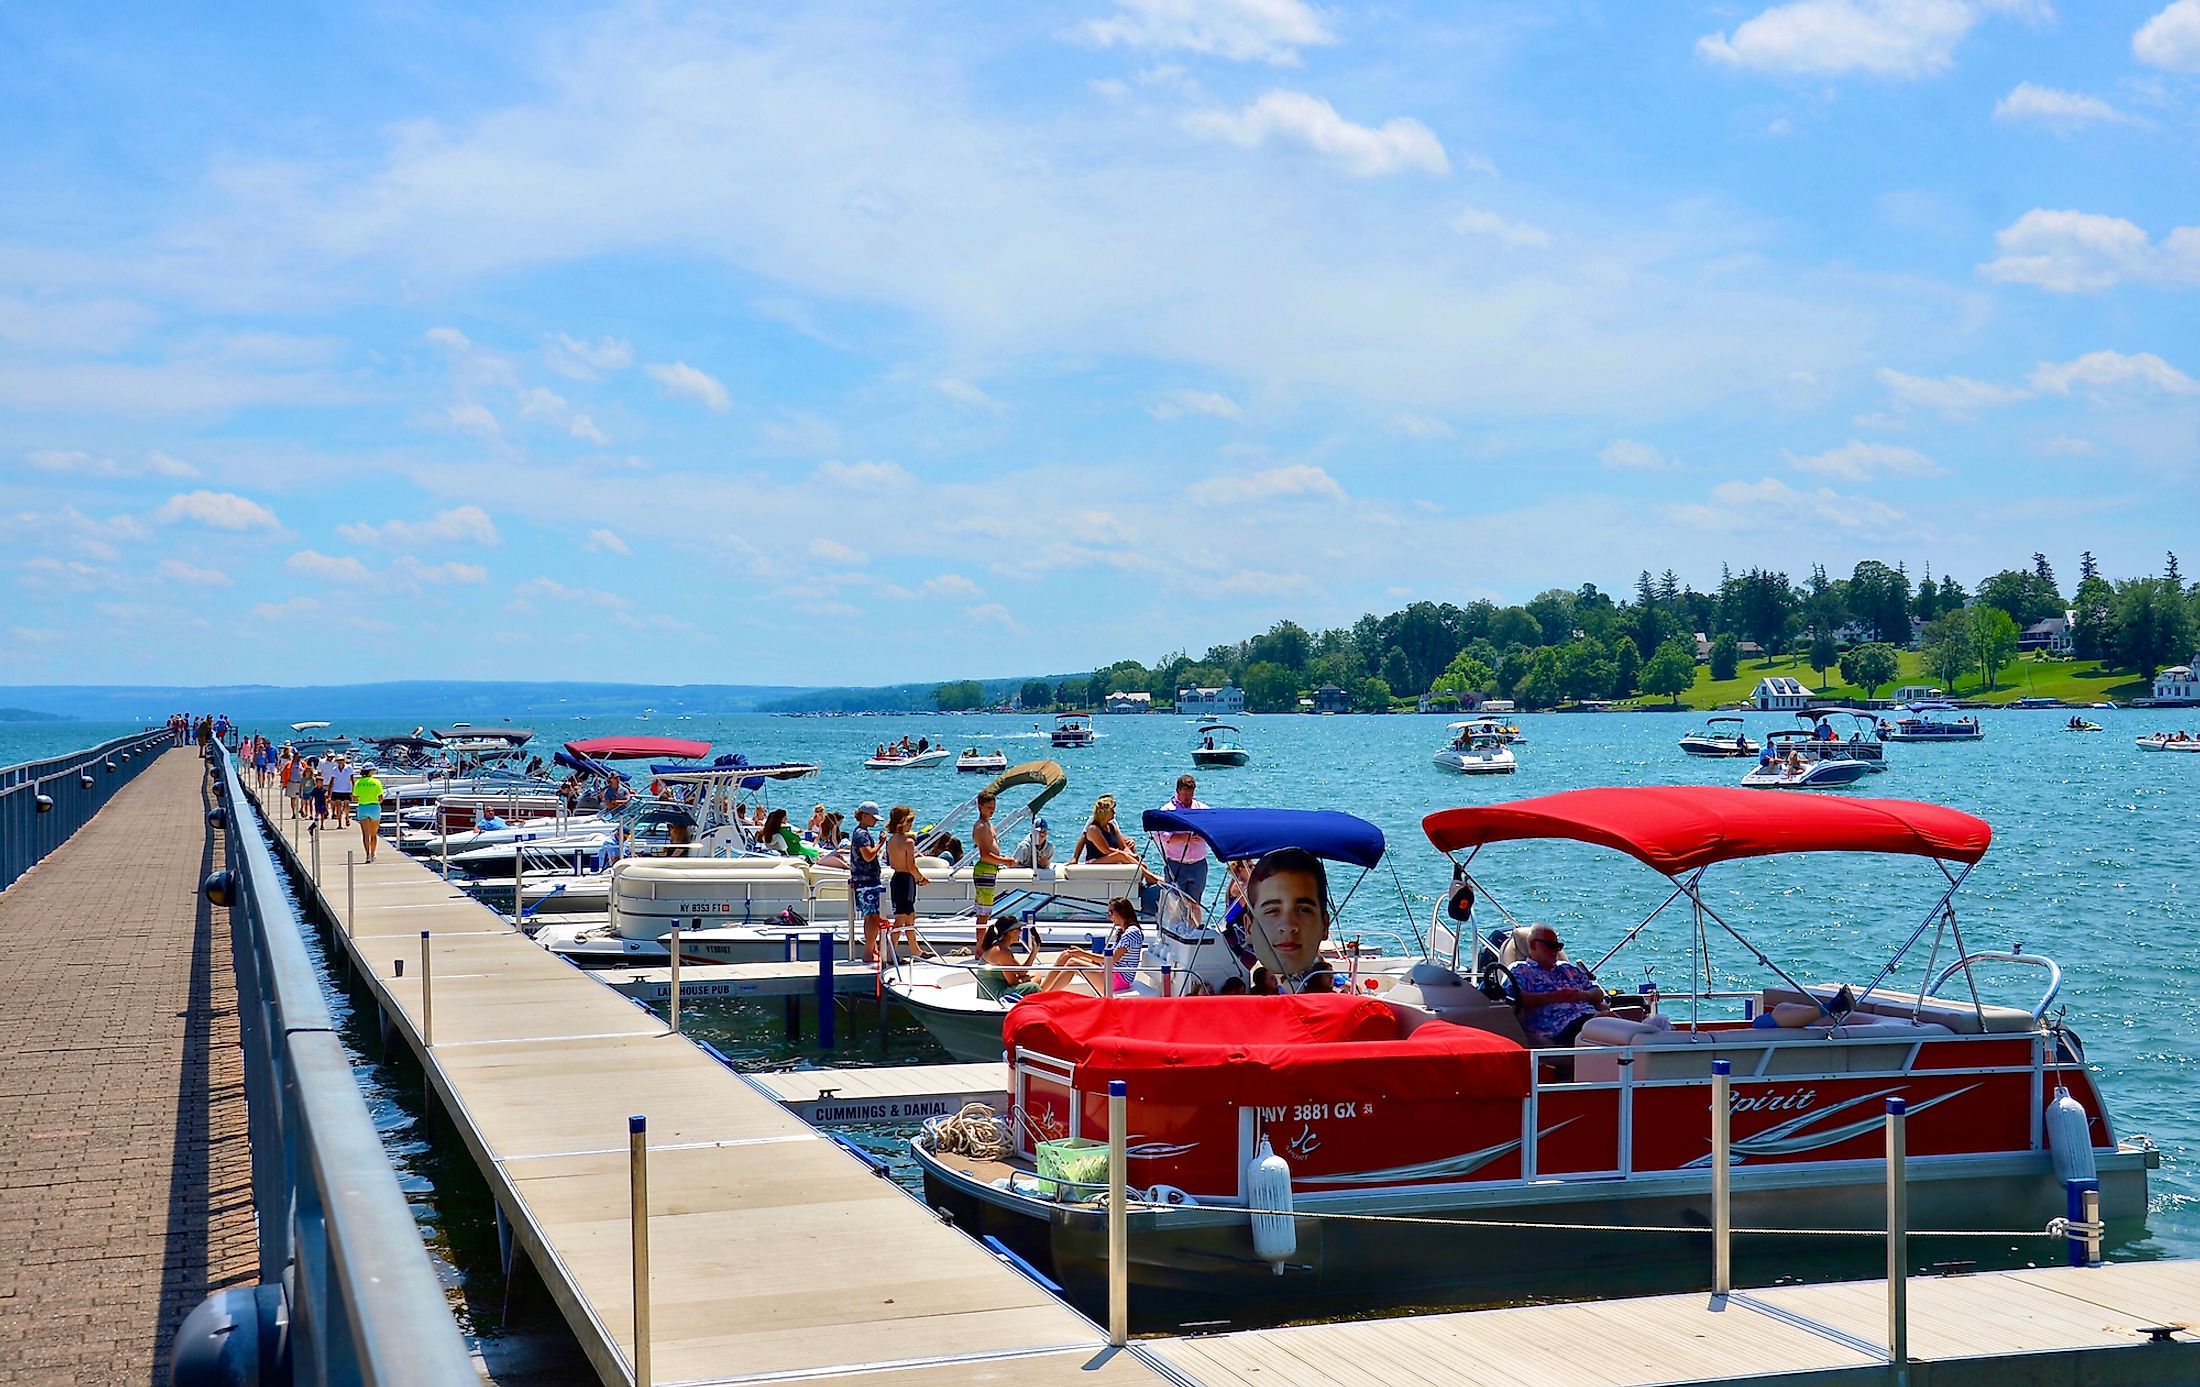 Pier and luxury boats docked in the Skaneateles Lake. Editorial credit: PQK / Shutterstock.com